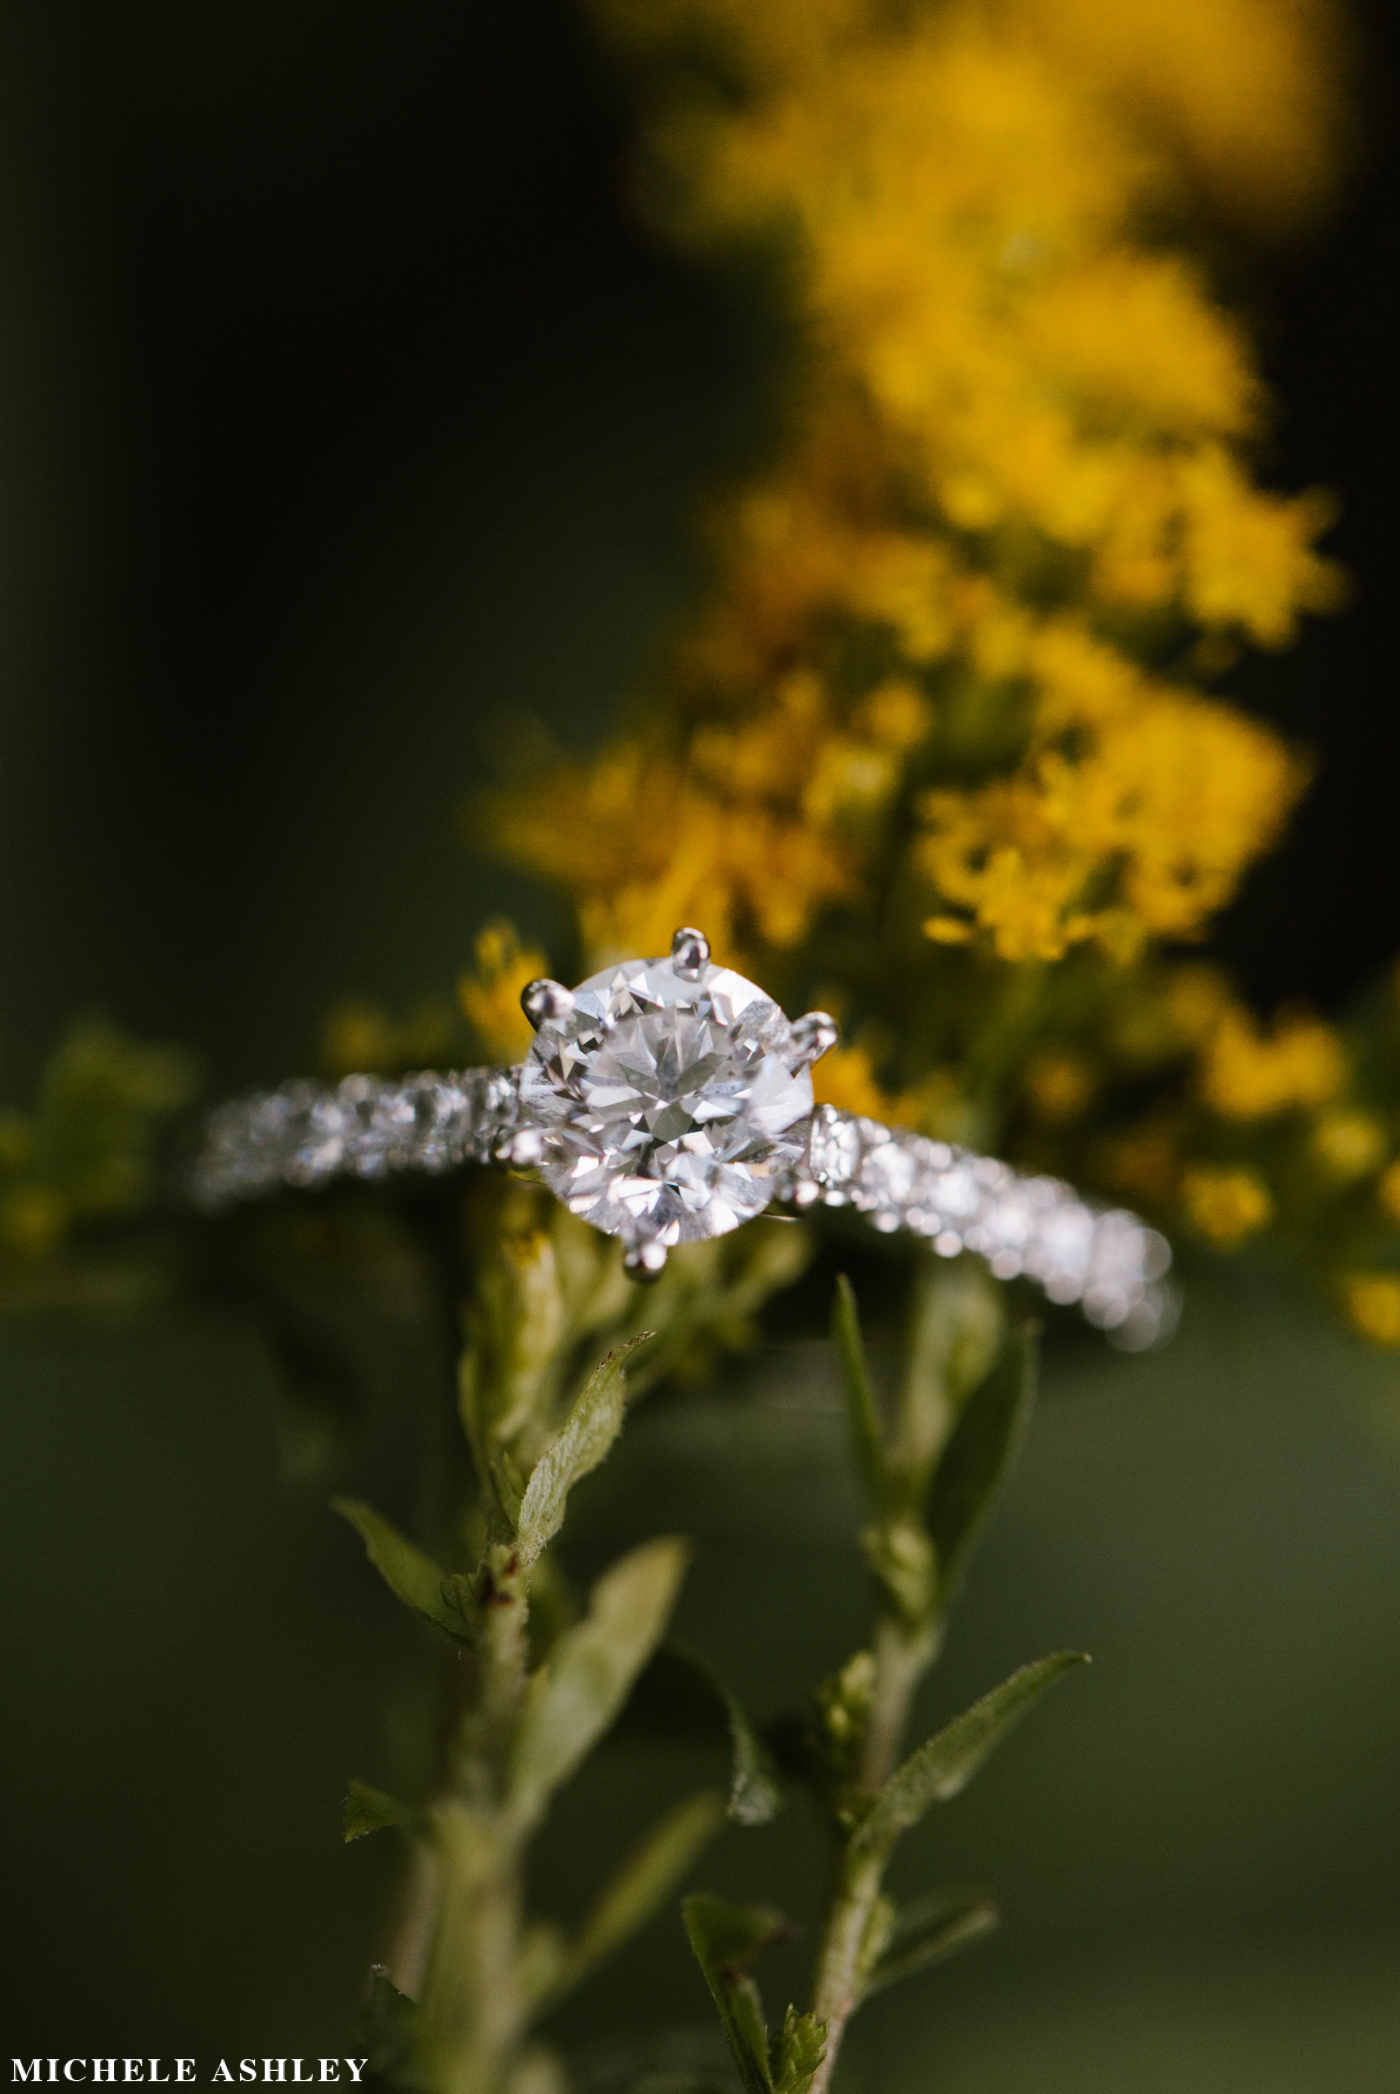 How to photograph engagement rings